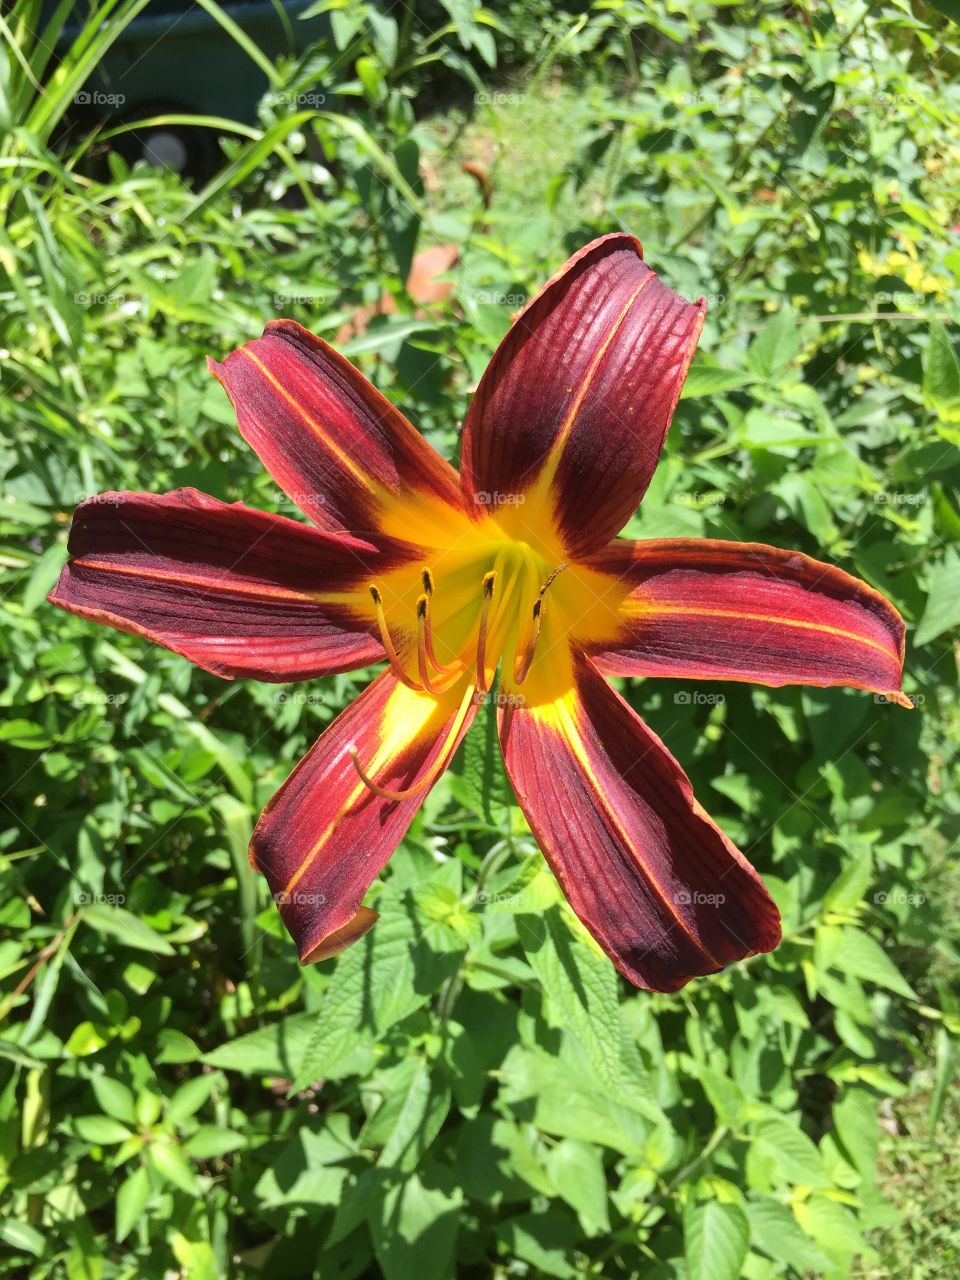 Red spider variant daylily